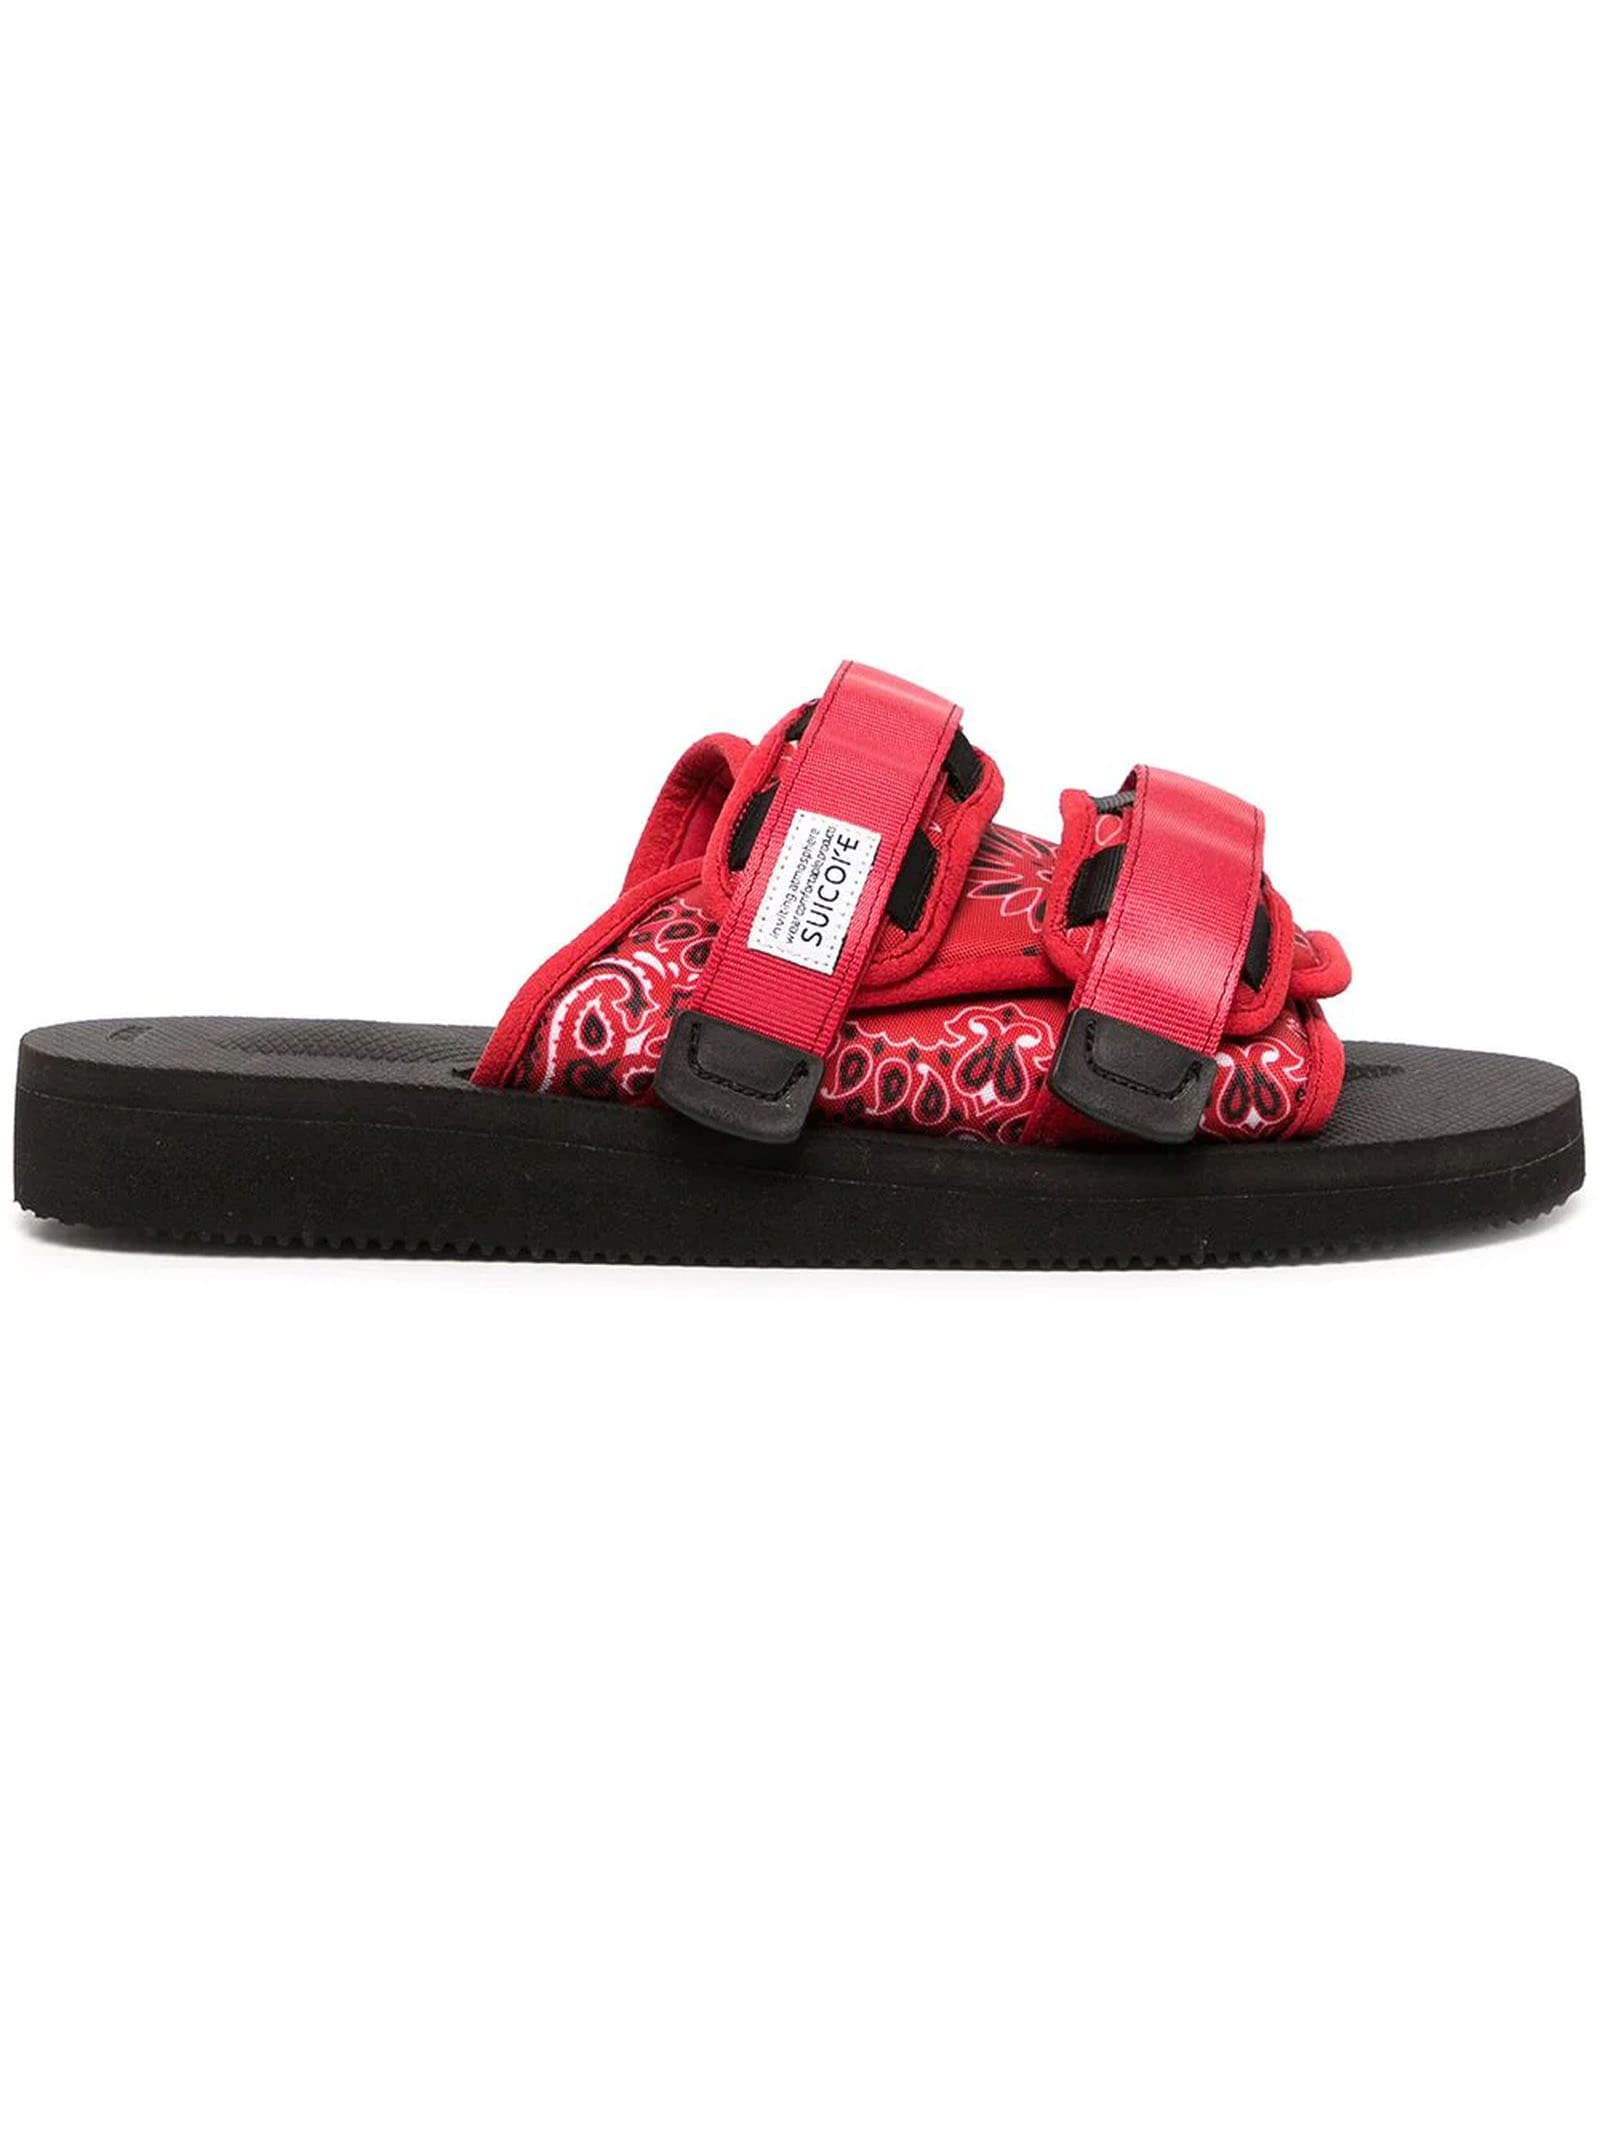 SUICOKE Red Moto-cab Touch-strap Sandals